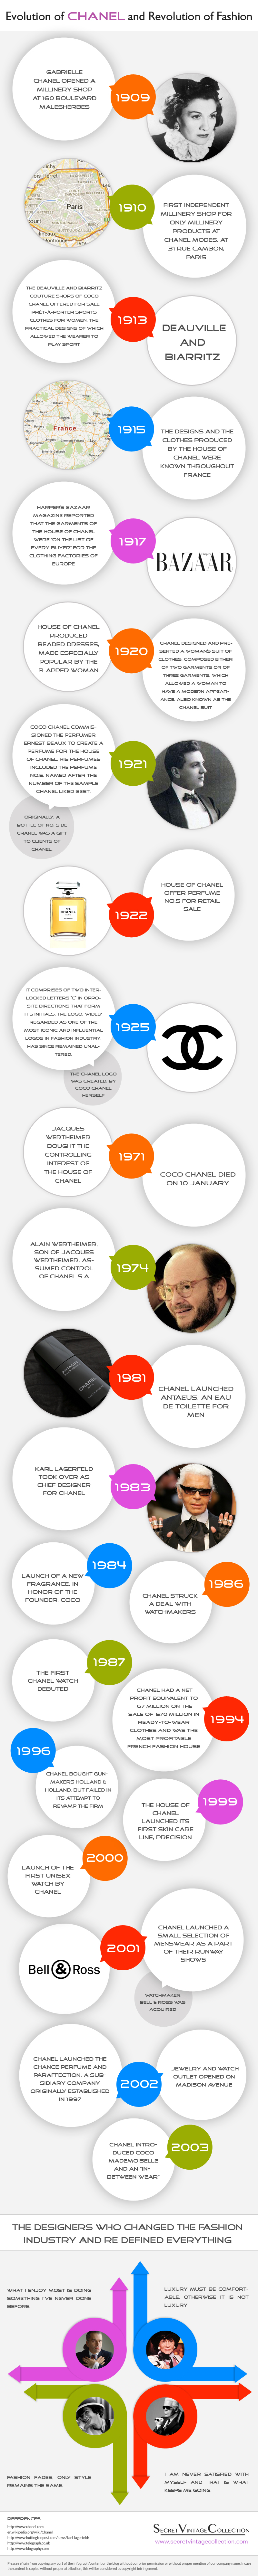 Fashion Revolution: The History of Chanel [Infographic]